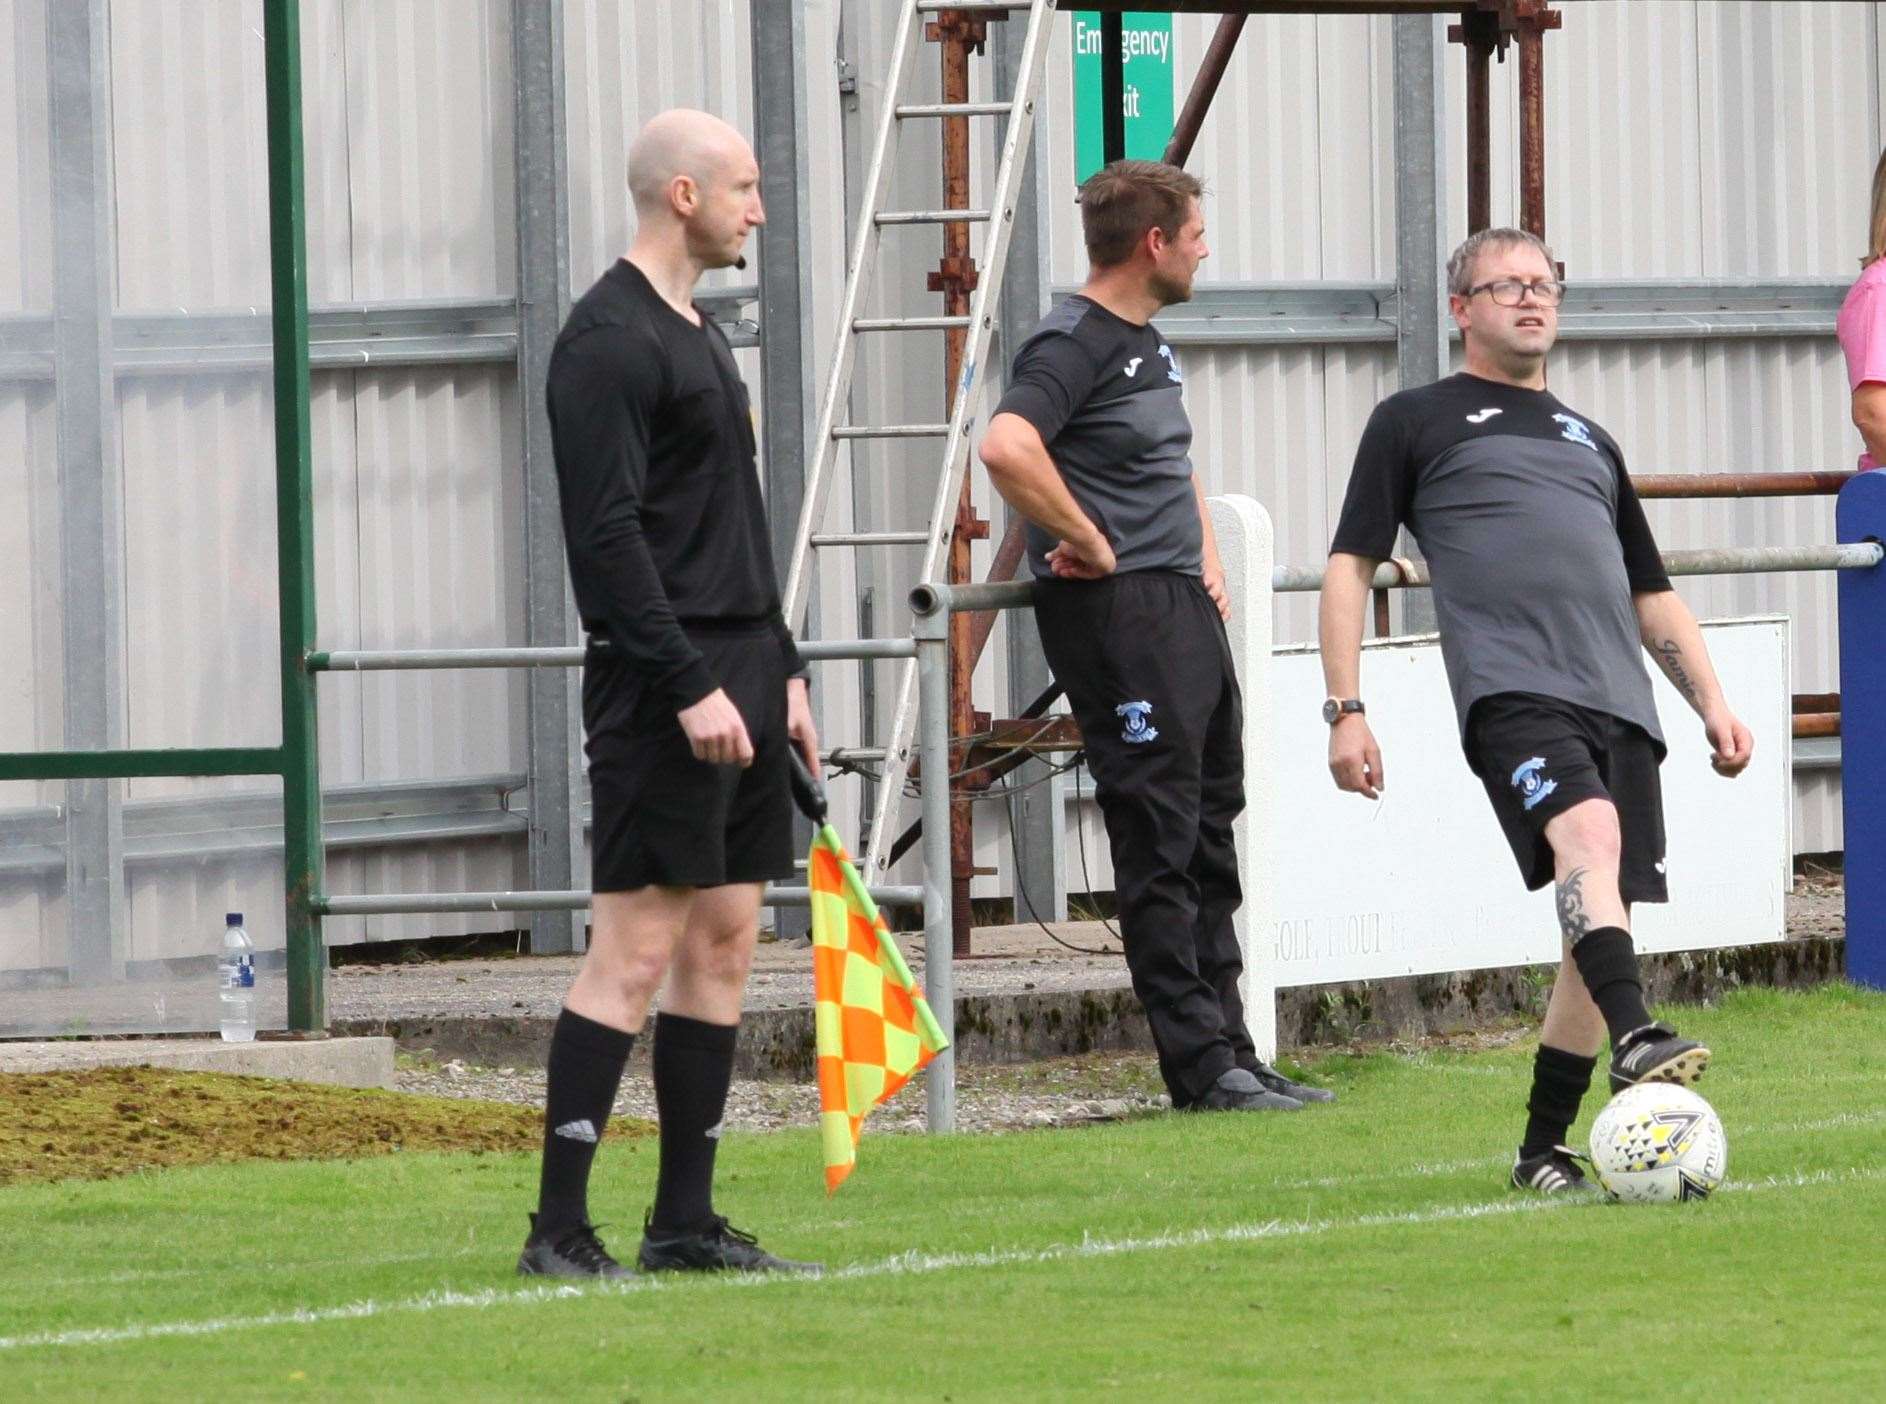 Charlie Brown was left disappointed after his side lost 6-0 against Buckie.